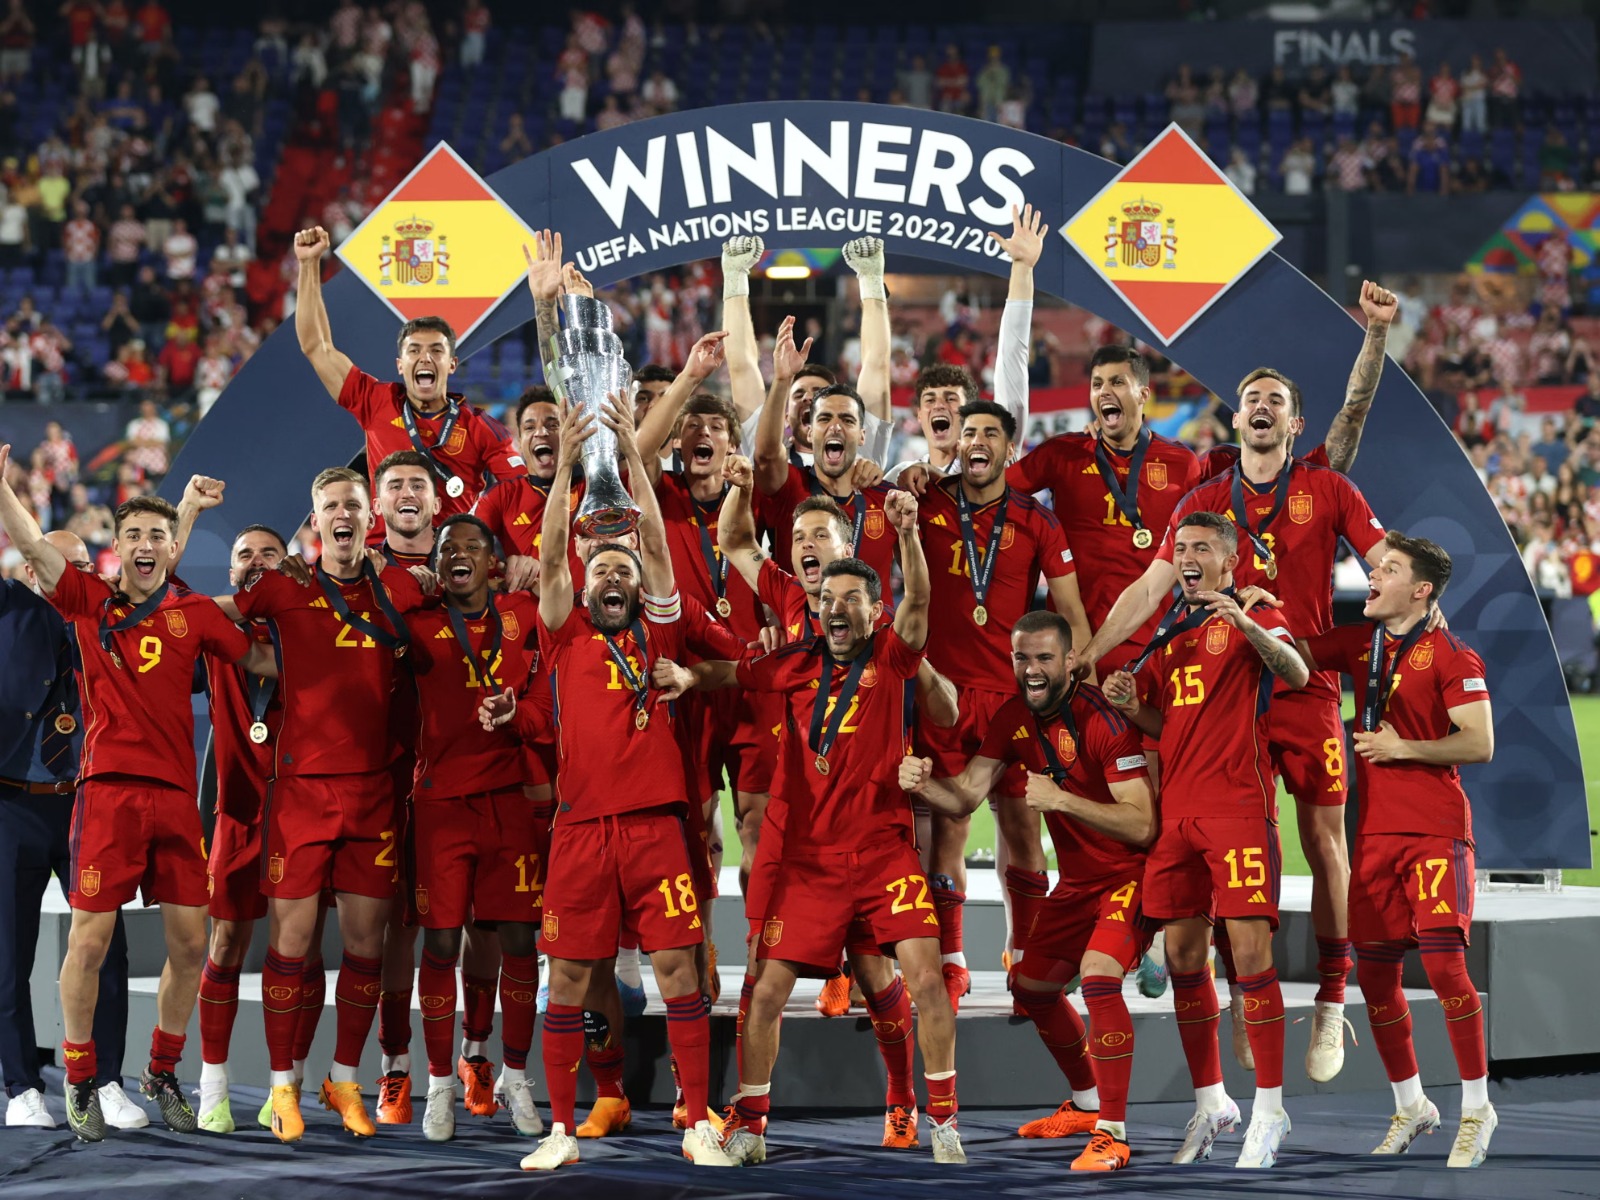 Nations League title for Spain Croatia defeated in penalty shootout